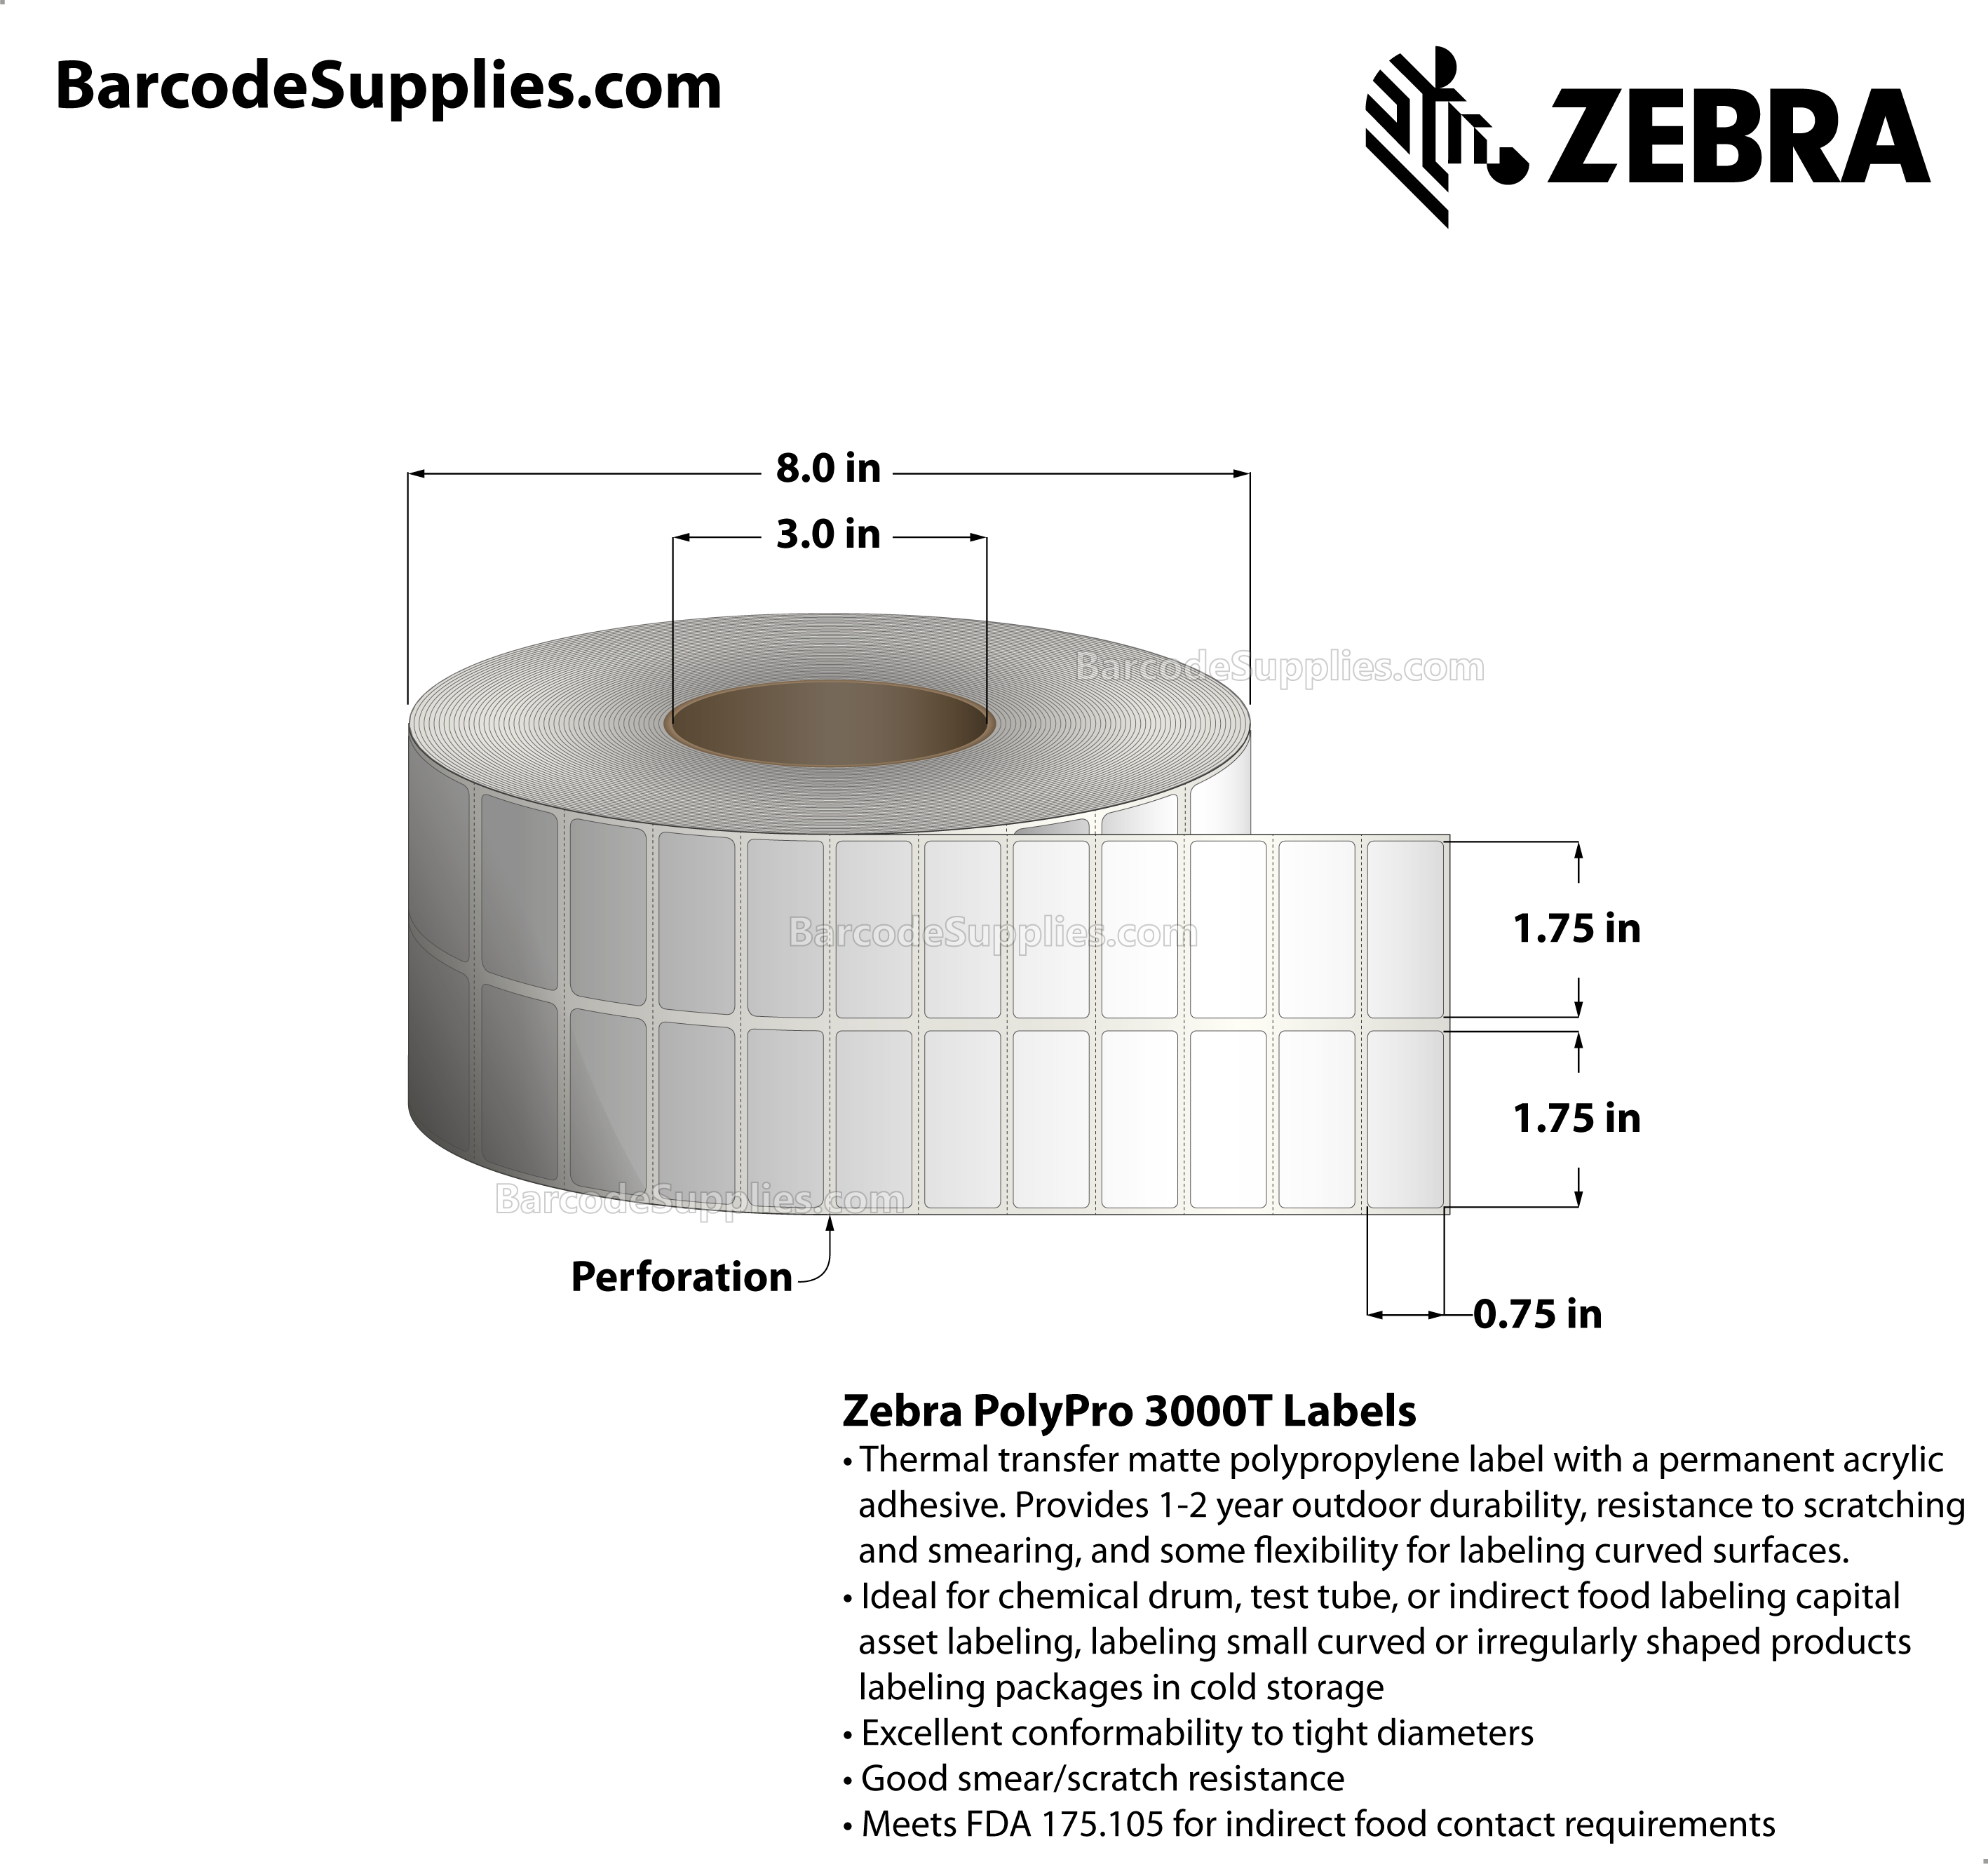 1.75 x 0.75 Thermal Transfer White PolyPro 3000T (2-Across) Labels With Permanent Adhesive - Perforated - 11888 Labels Per Roll - Carton Of 4 Rolls - 47552 Labels Total - MPN: 10011988